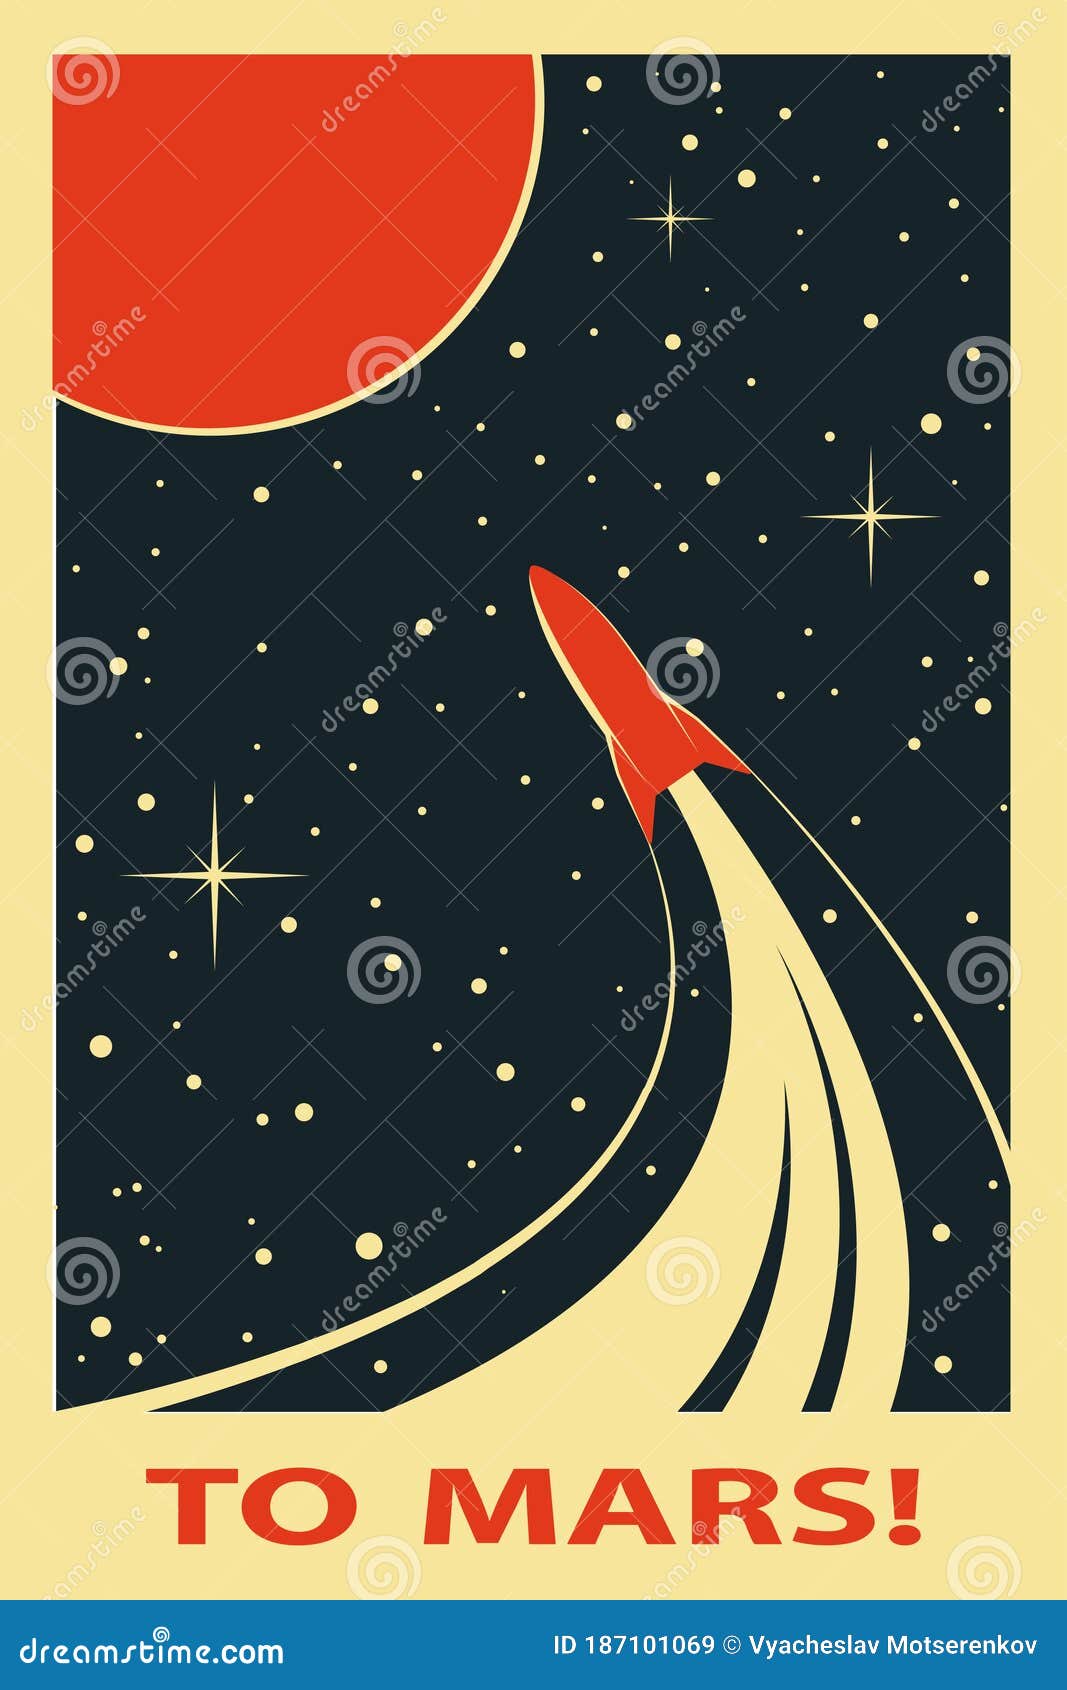  space poster. stylized under the old soviet space propaganda